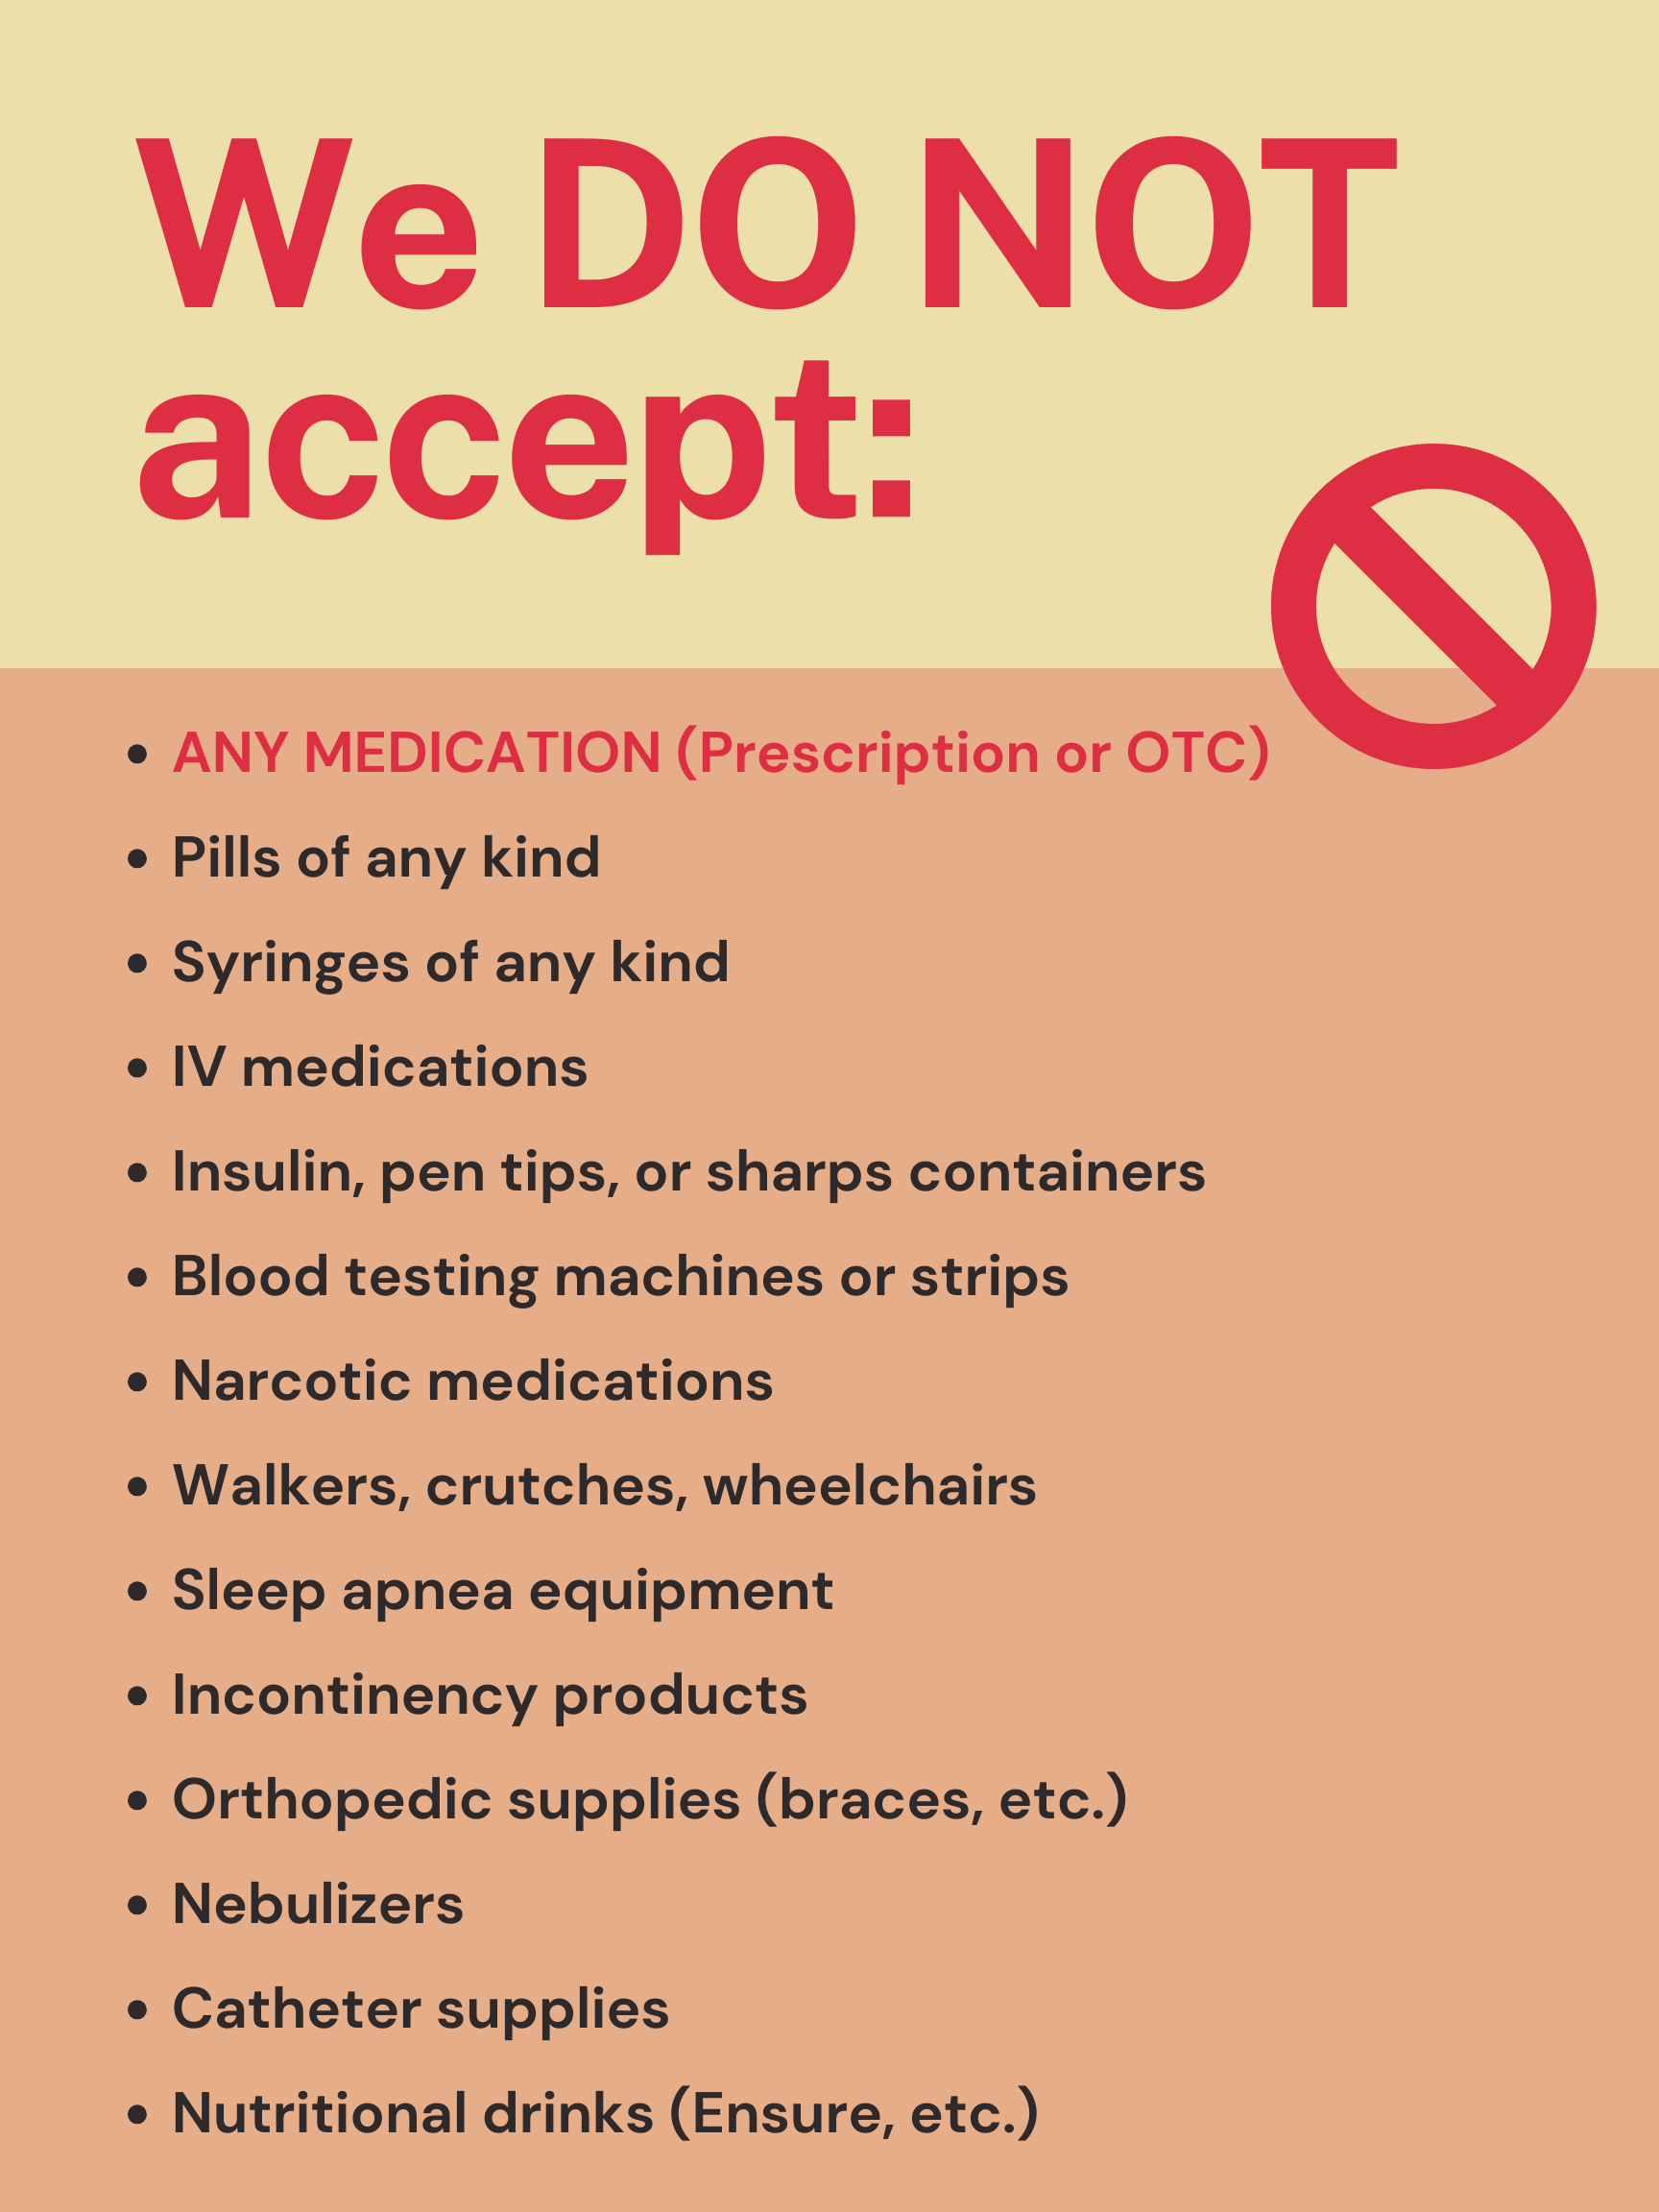 List of items we cannot accept for donations